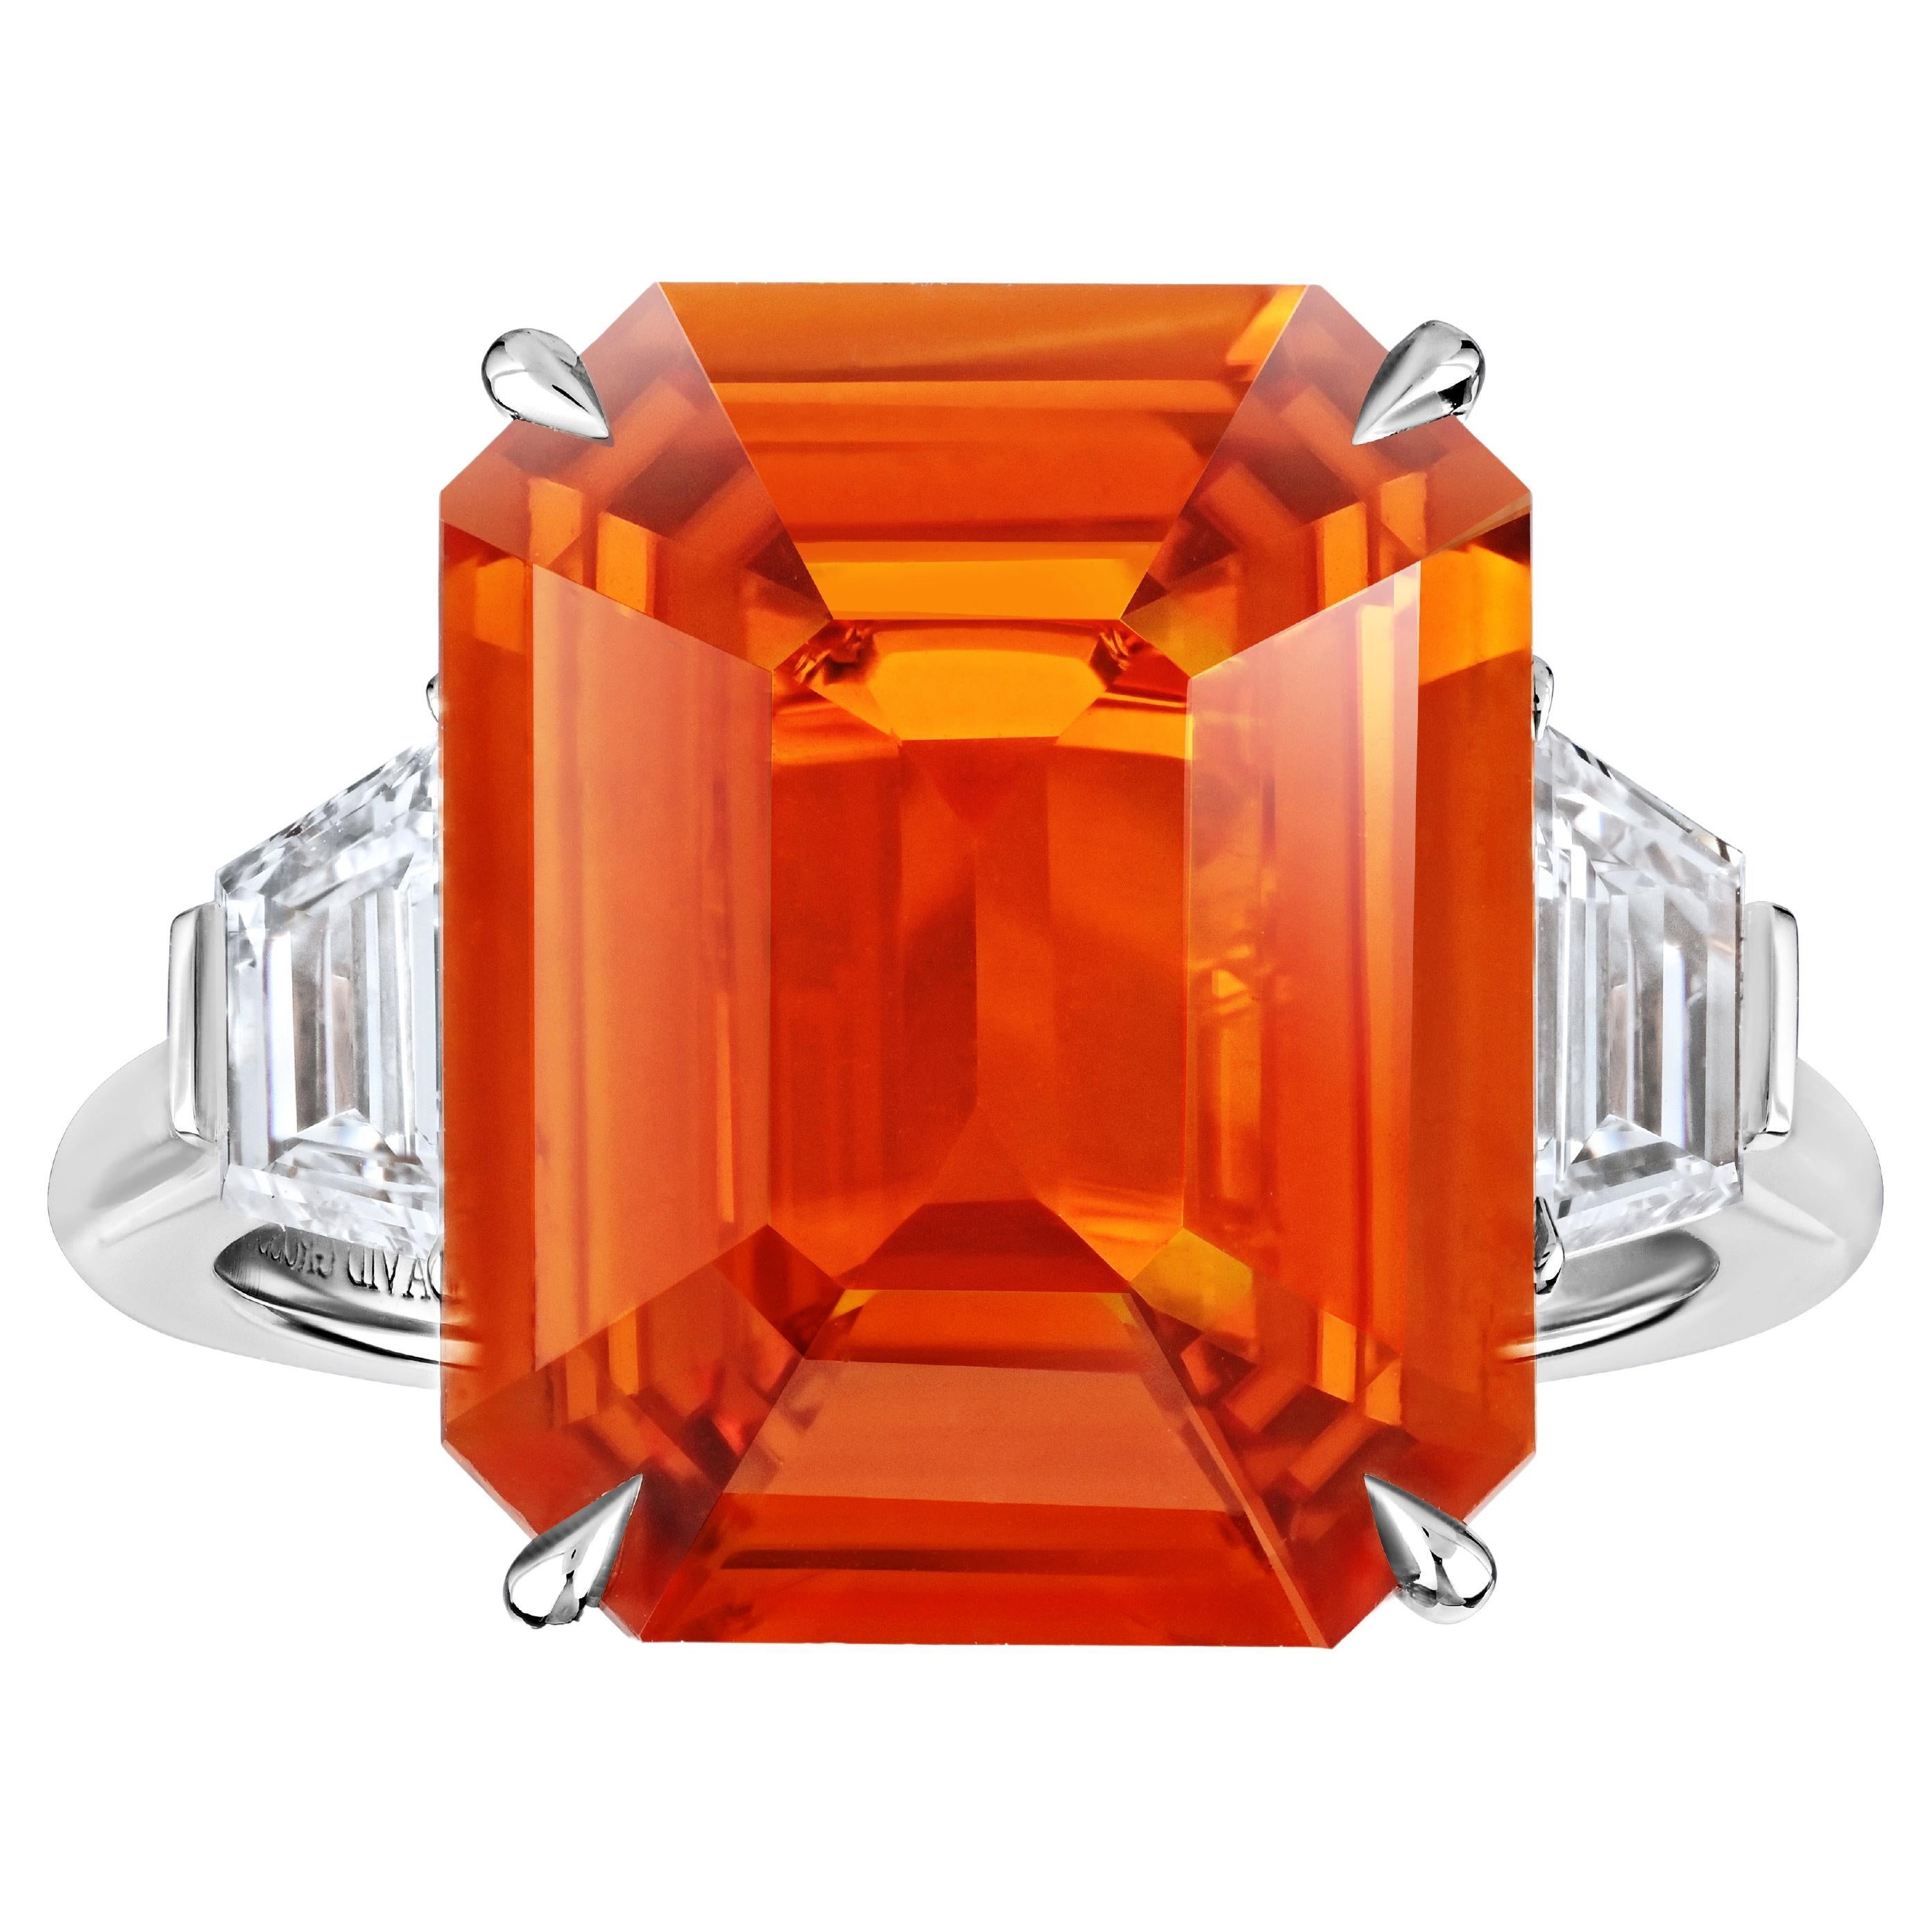 10.53 carat Emerald Cut Orange Sapphire with two Trapezoid Step Cut Diamonds in  For Sale